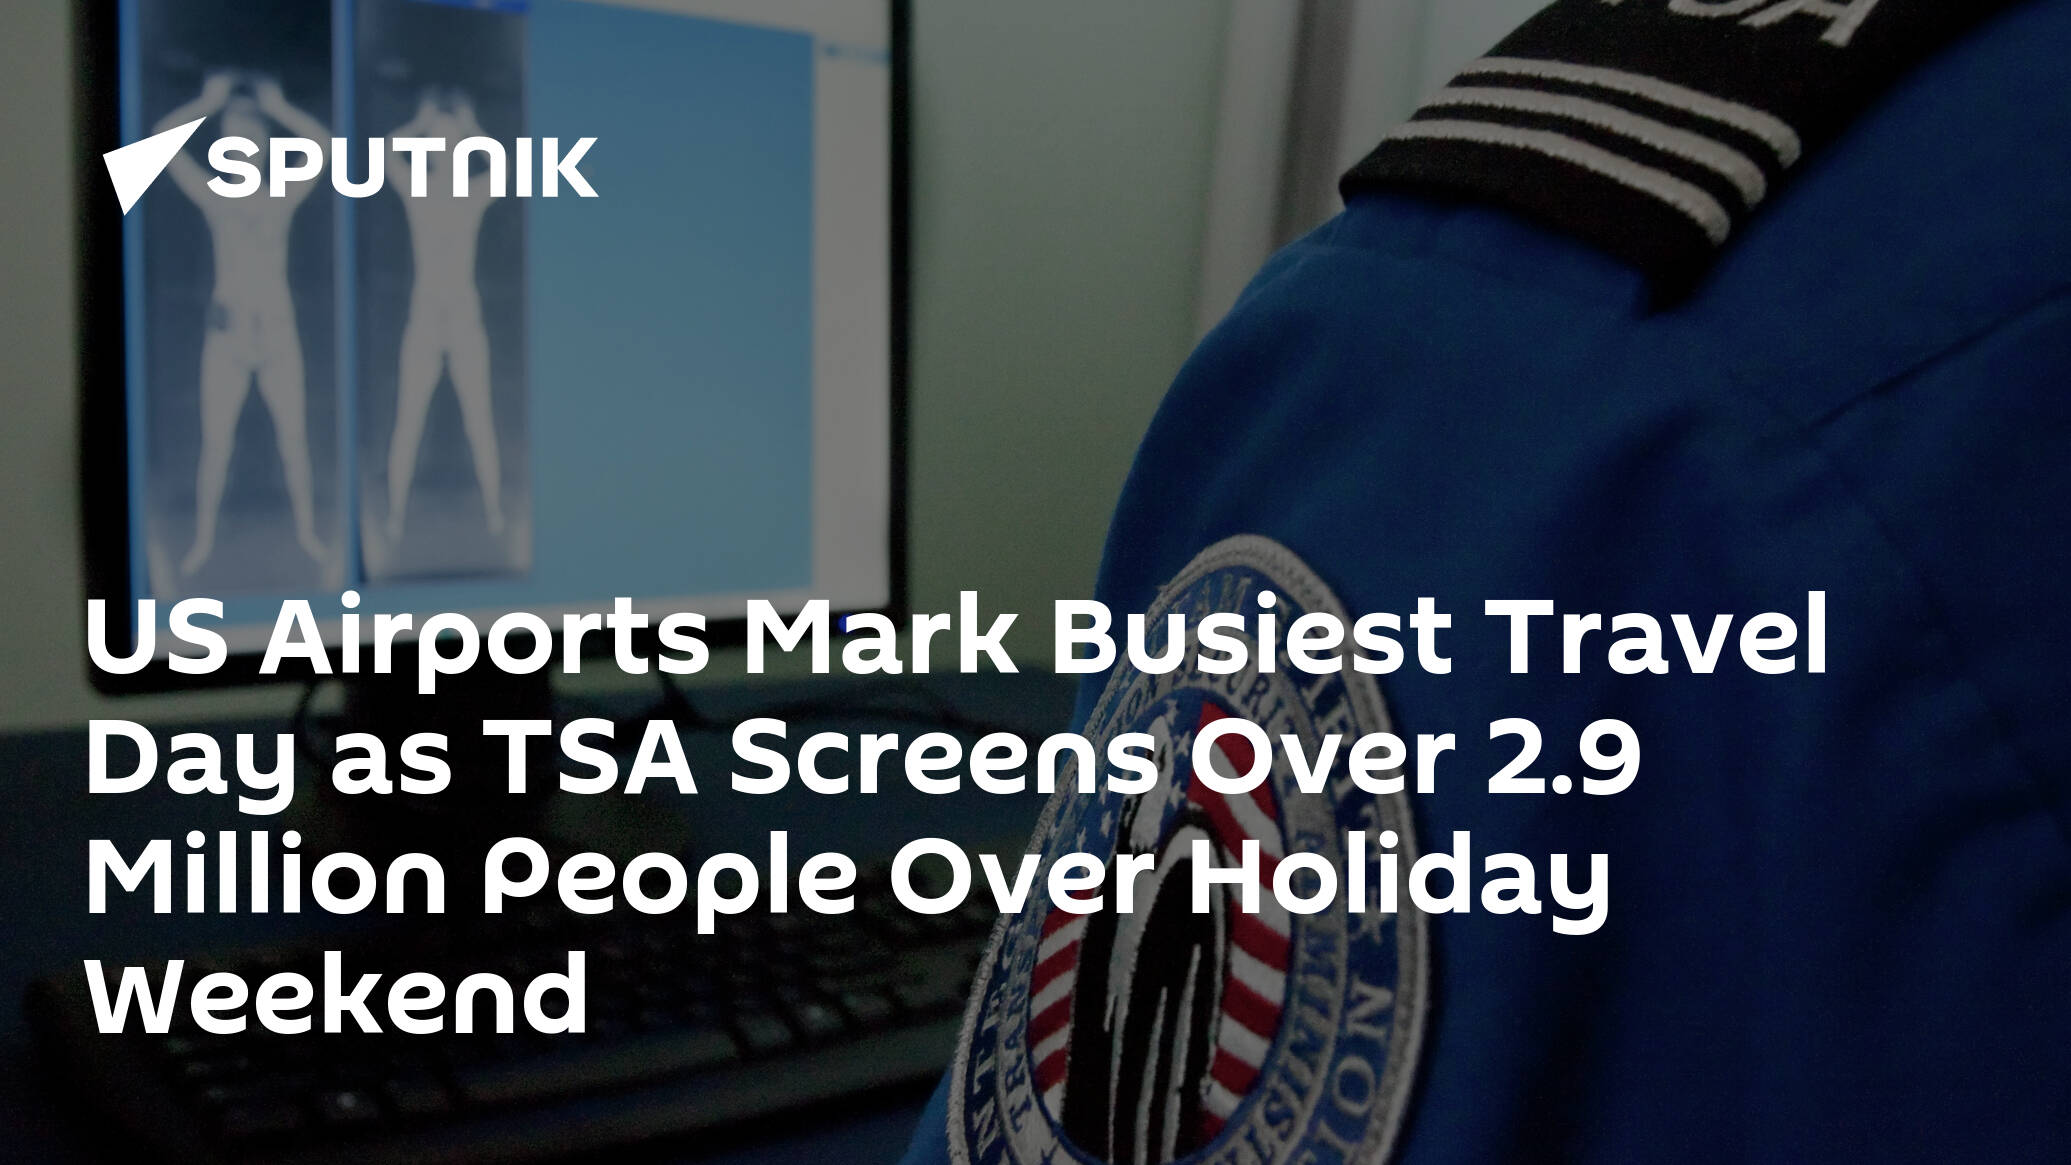 US Airports Mark Busiest Travel Day as TSA Screens Over 2.9 Million People Over Holiday Weekend